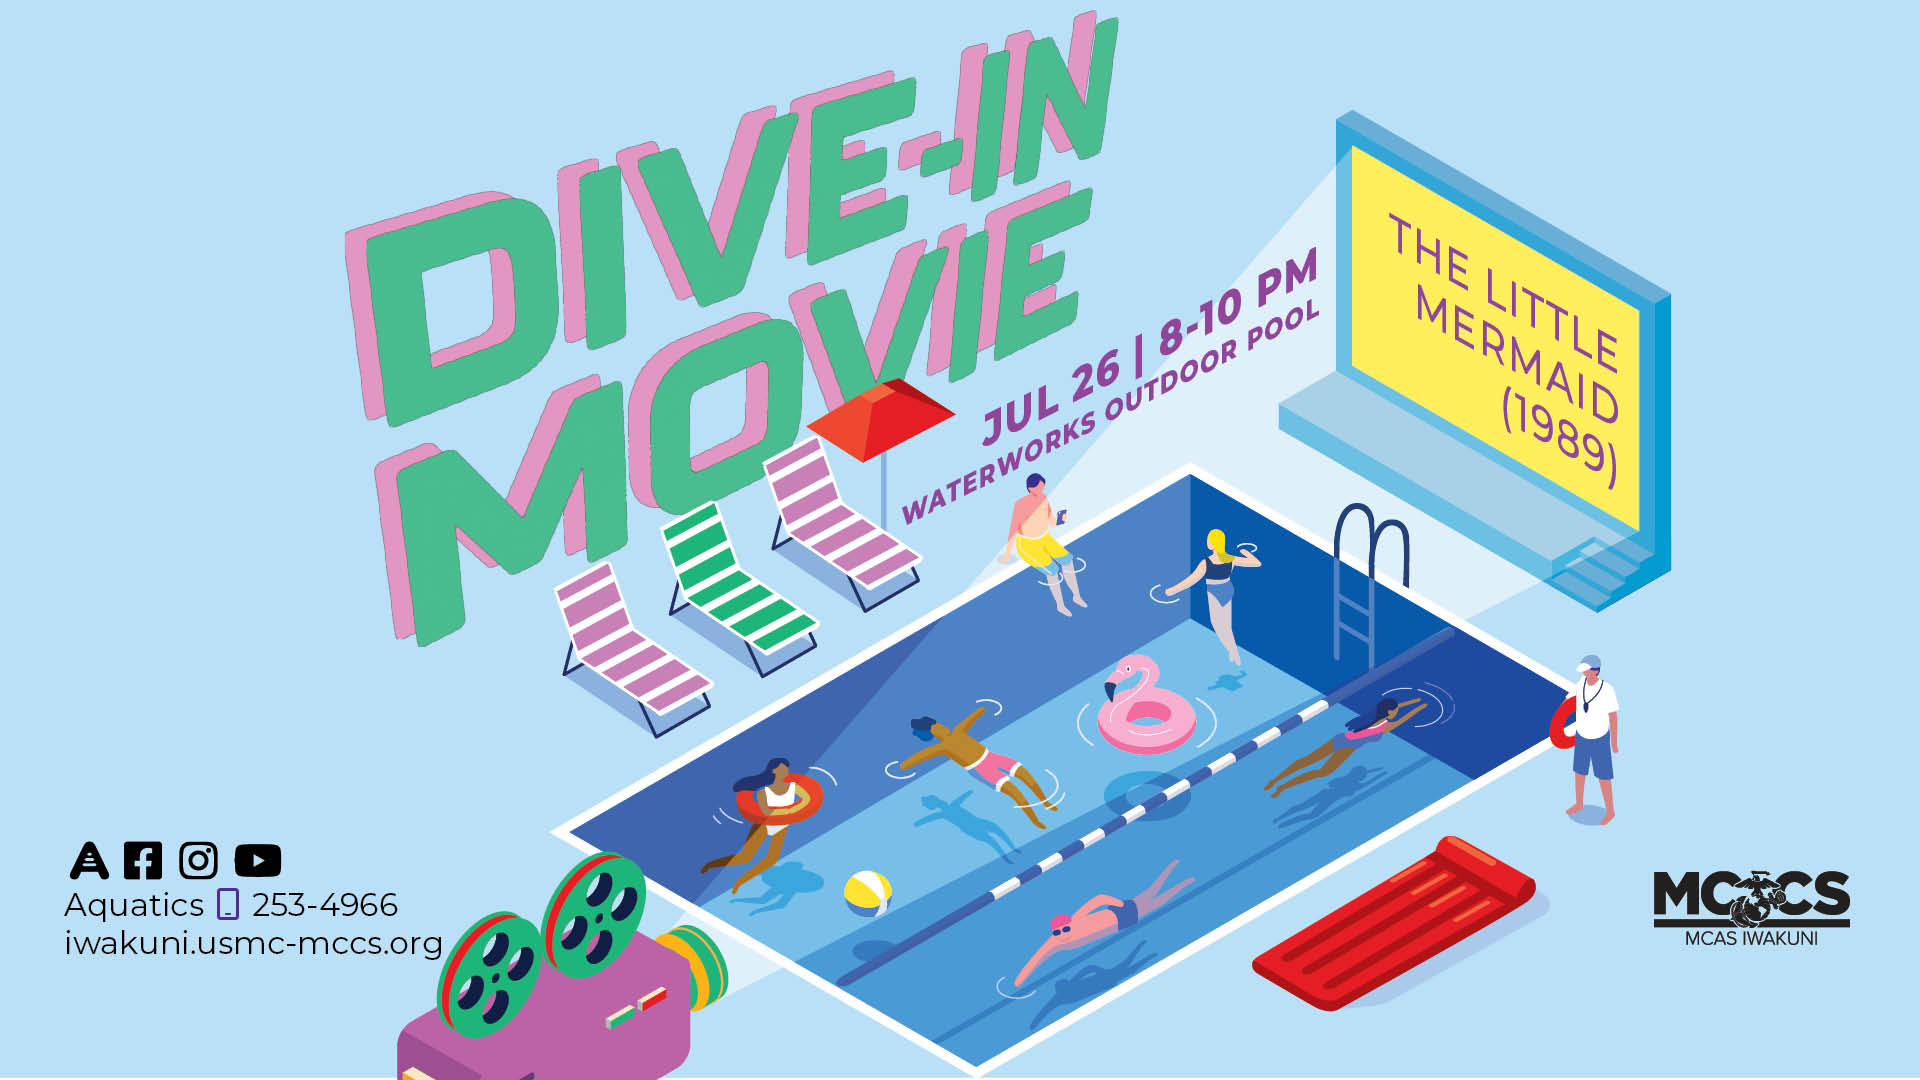 Summer Dive-In Movie - The Little Mermaid (1989)